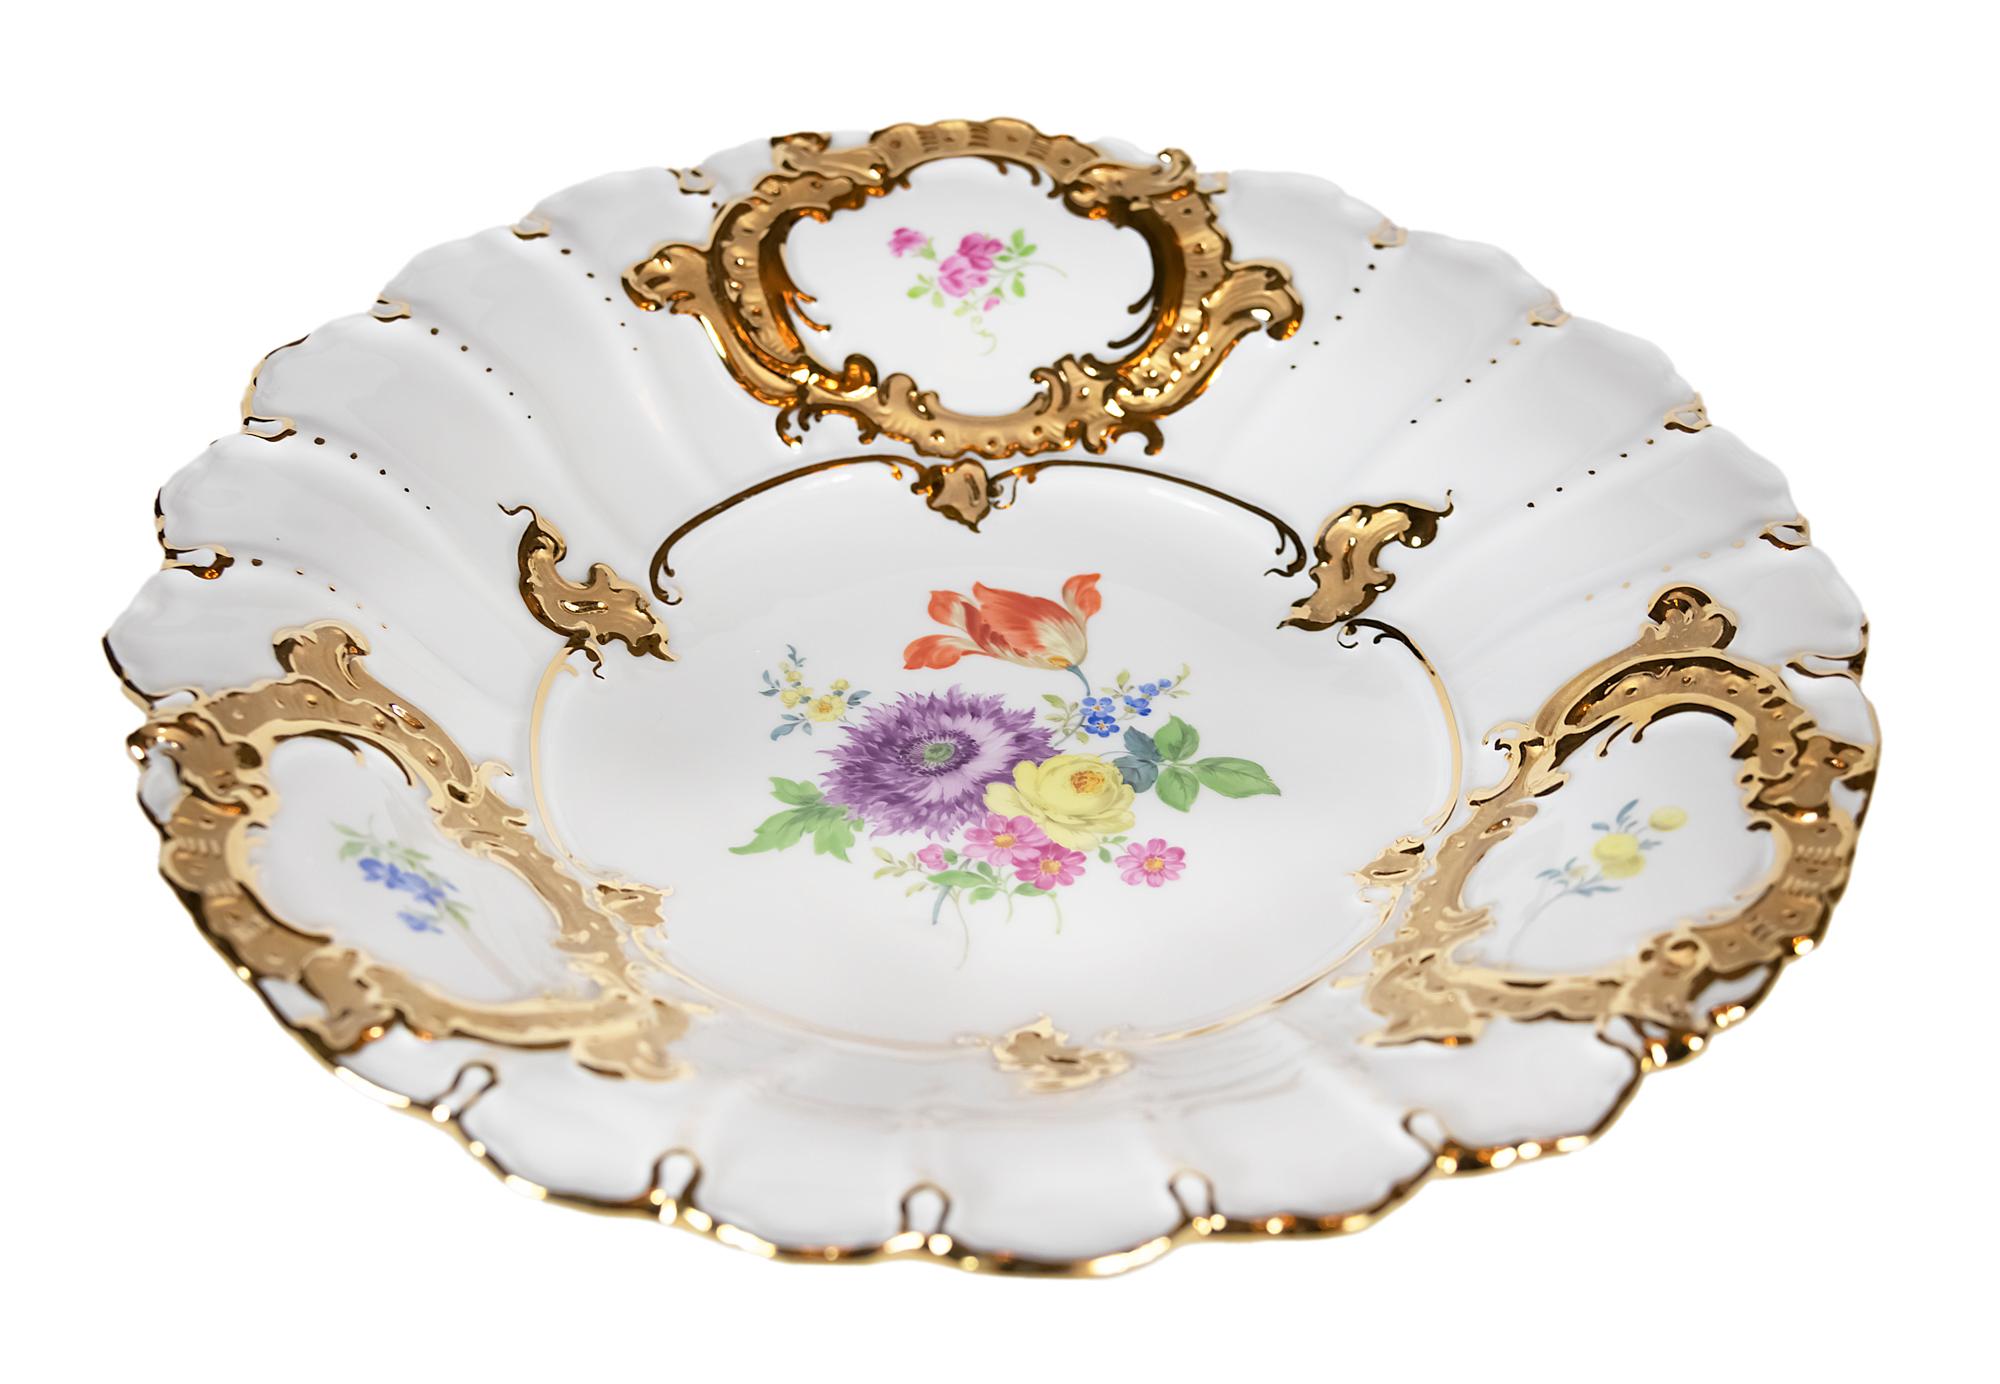 Meissen Porcelain plate with hand painted floral motives and gold decor.